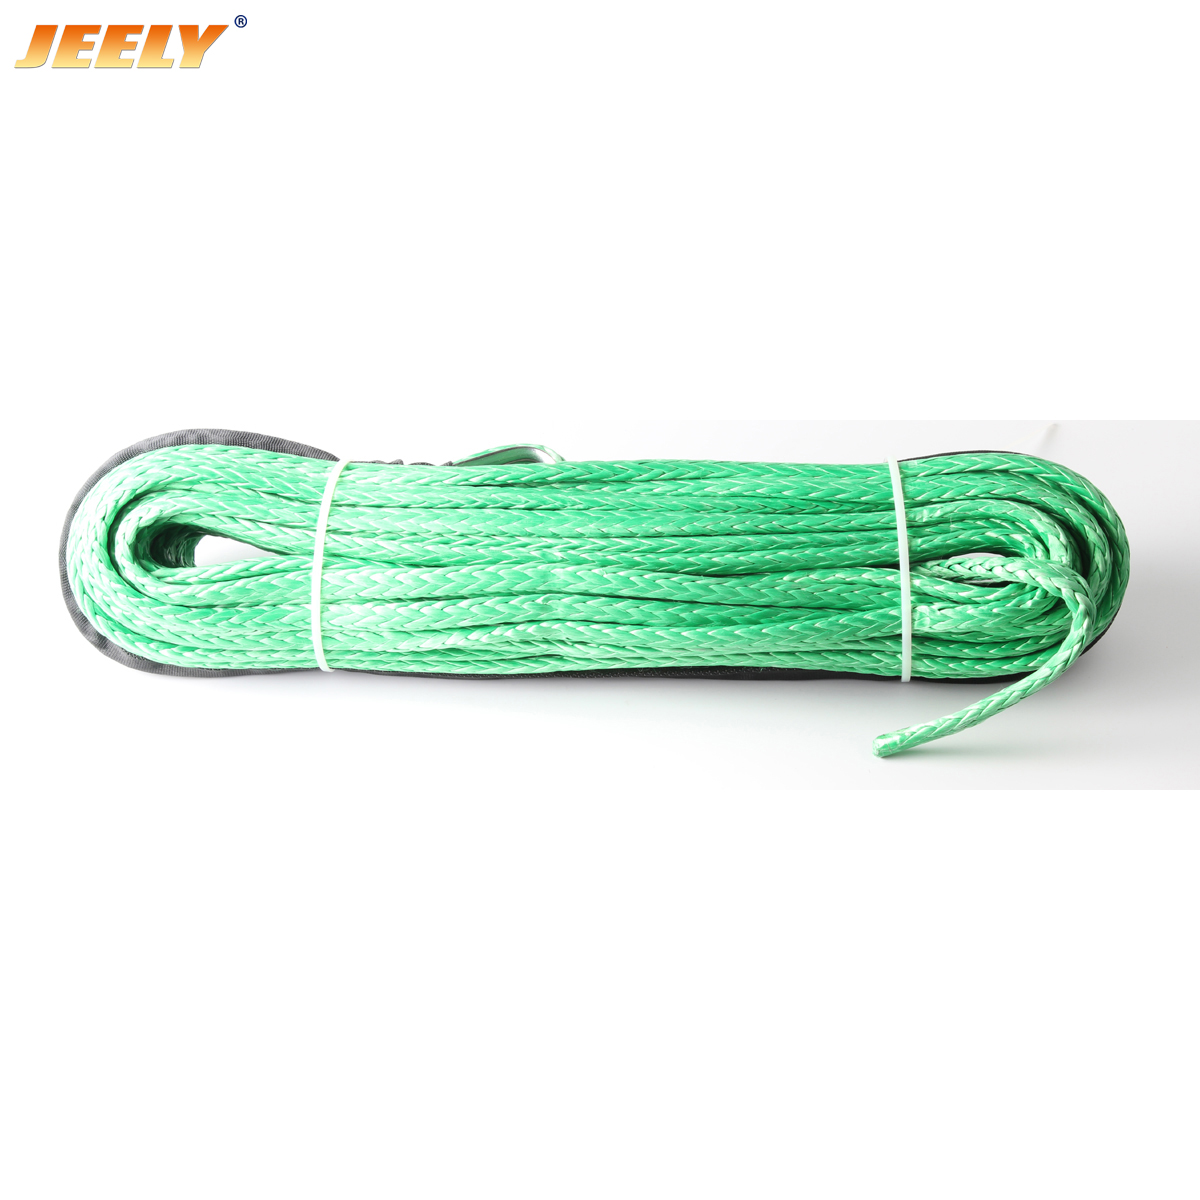 10mm*30m 21600LBS UHMWPE Winch Tow Strap for offroad 4wd,auto parts Winch Rope